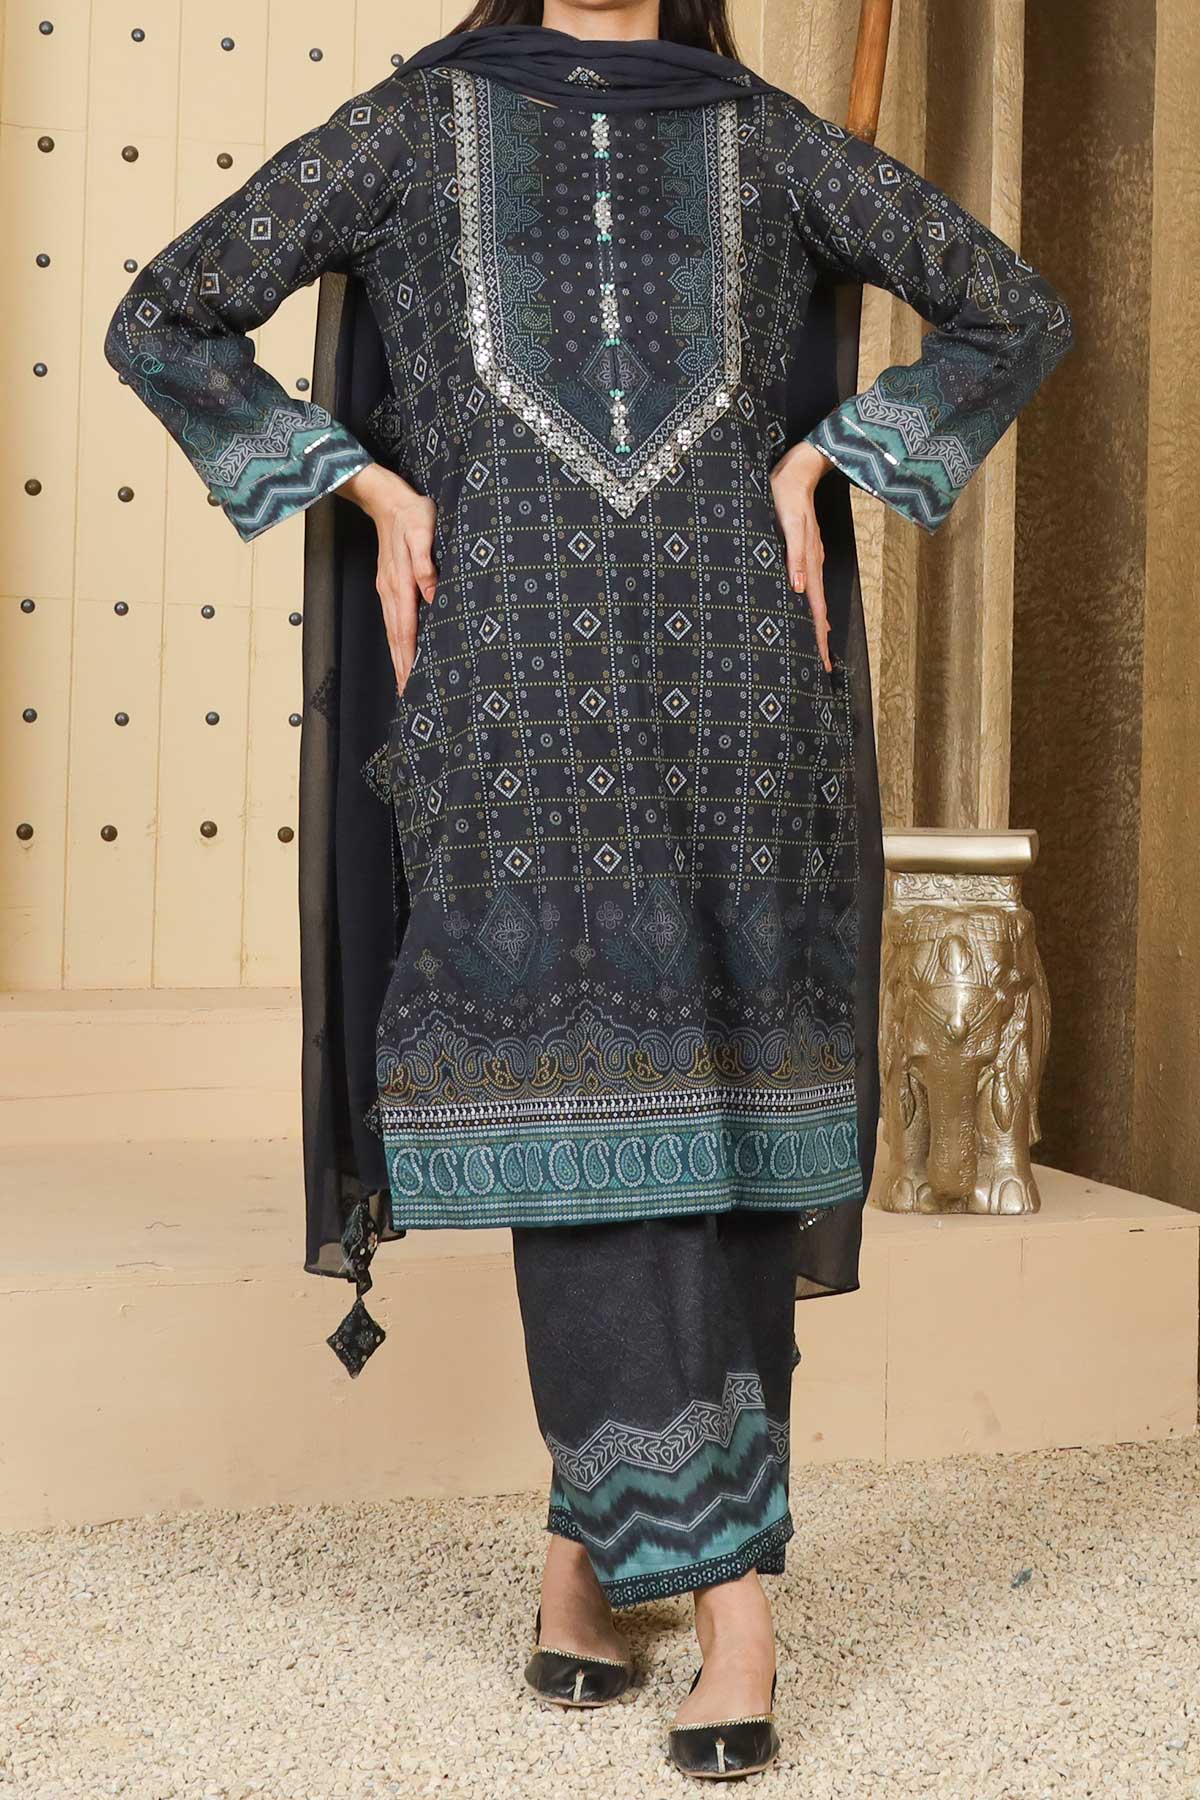 Deep Black Color Embroidered Lawn Suit For Women